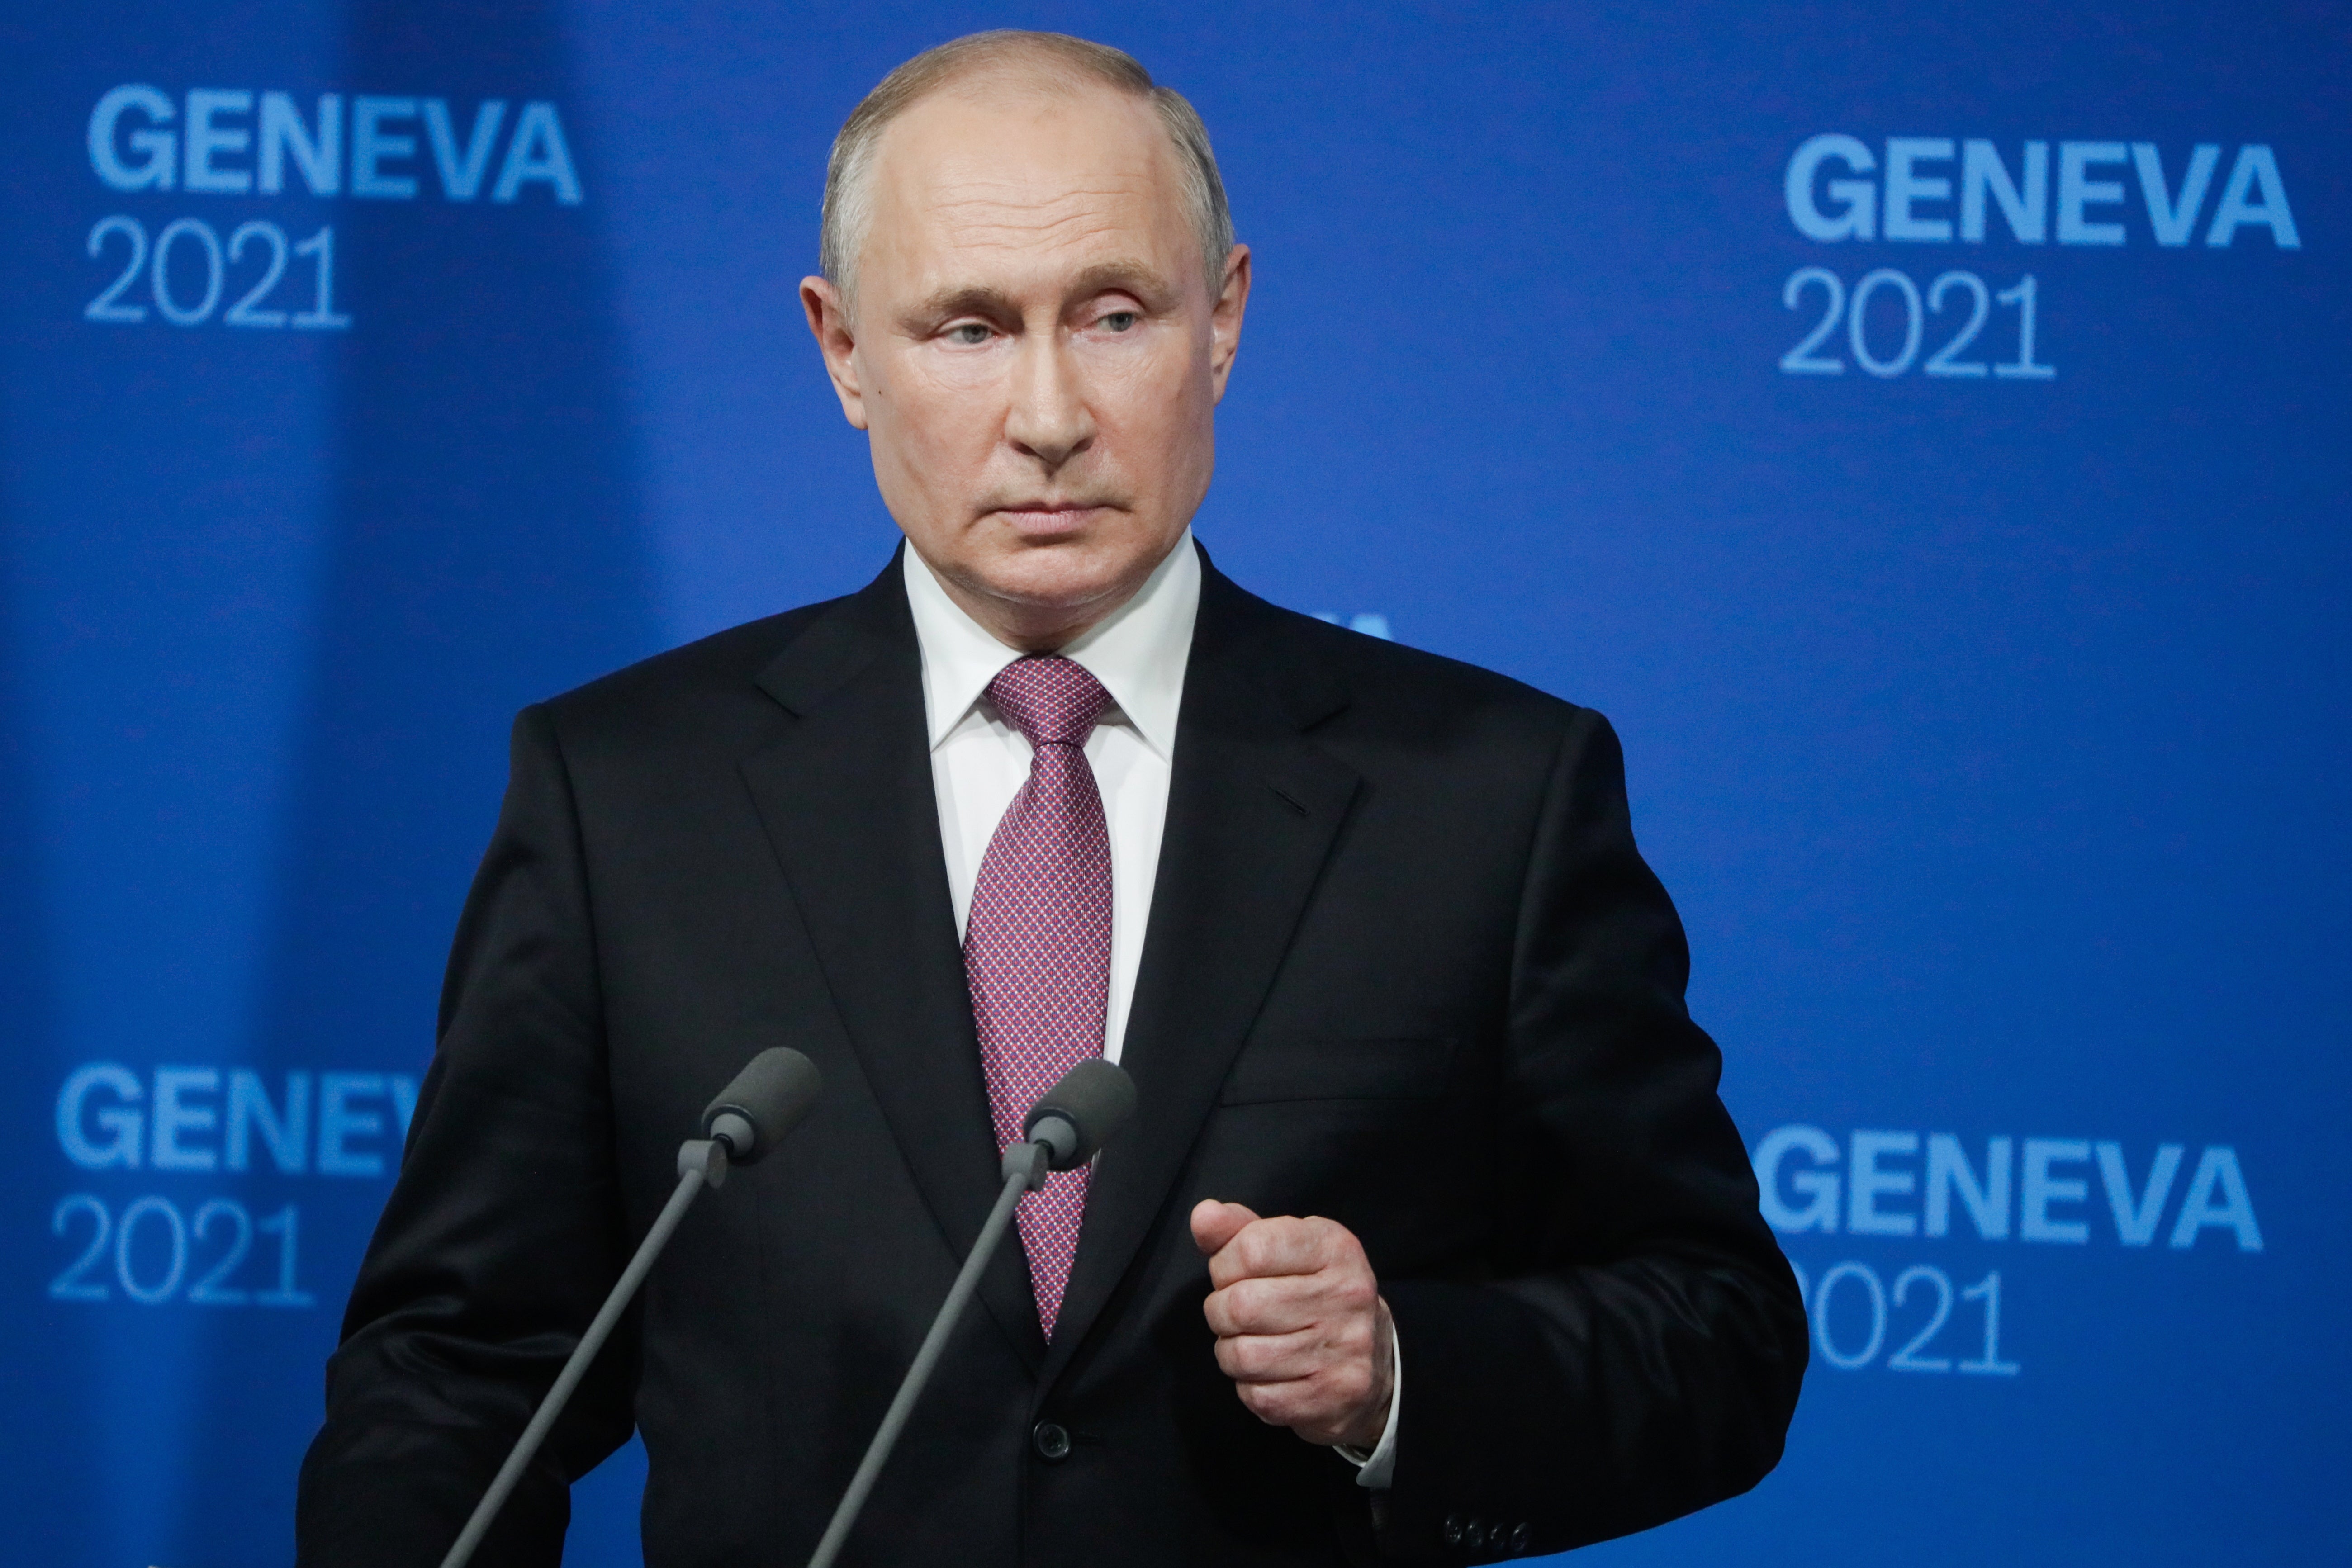 Russian President Vladimir Putin holds a news conference after the US-Russia summit between himself and President Joe Biden at the Villa La Grange, in Geneva